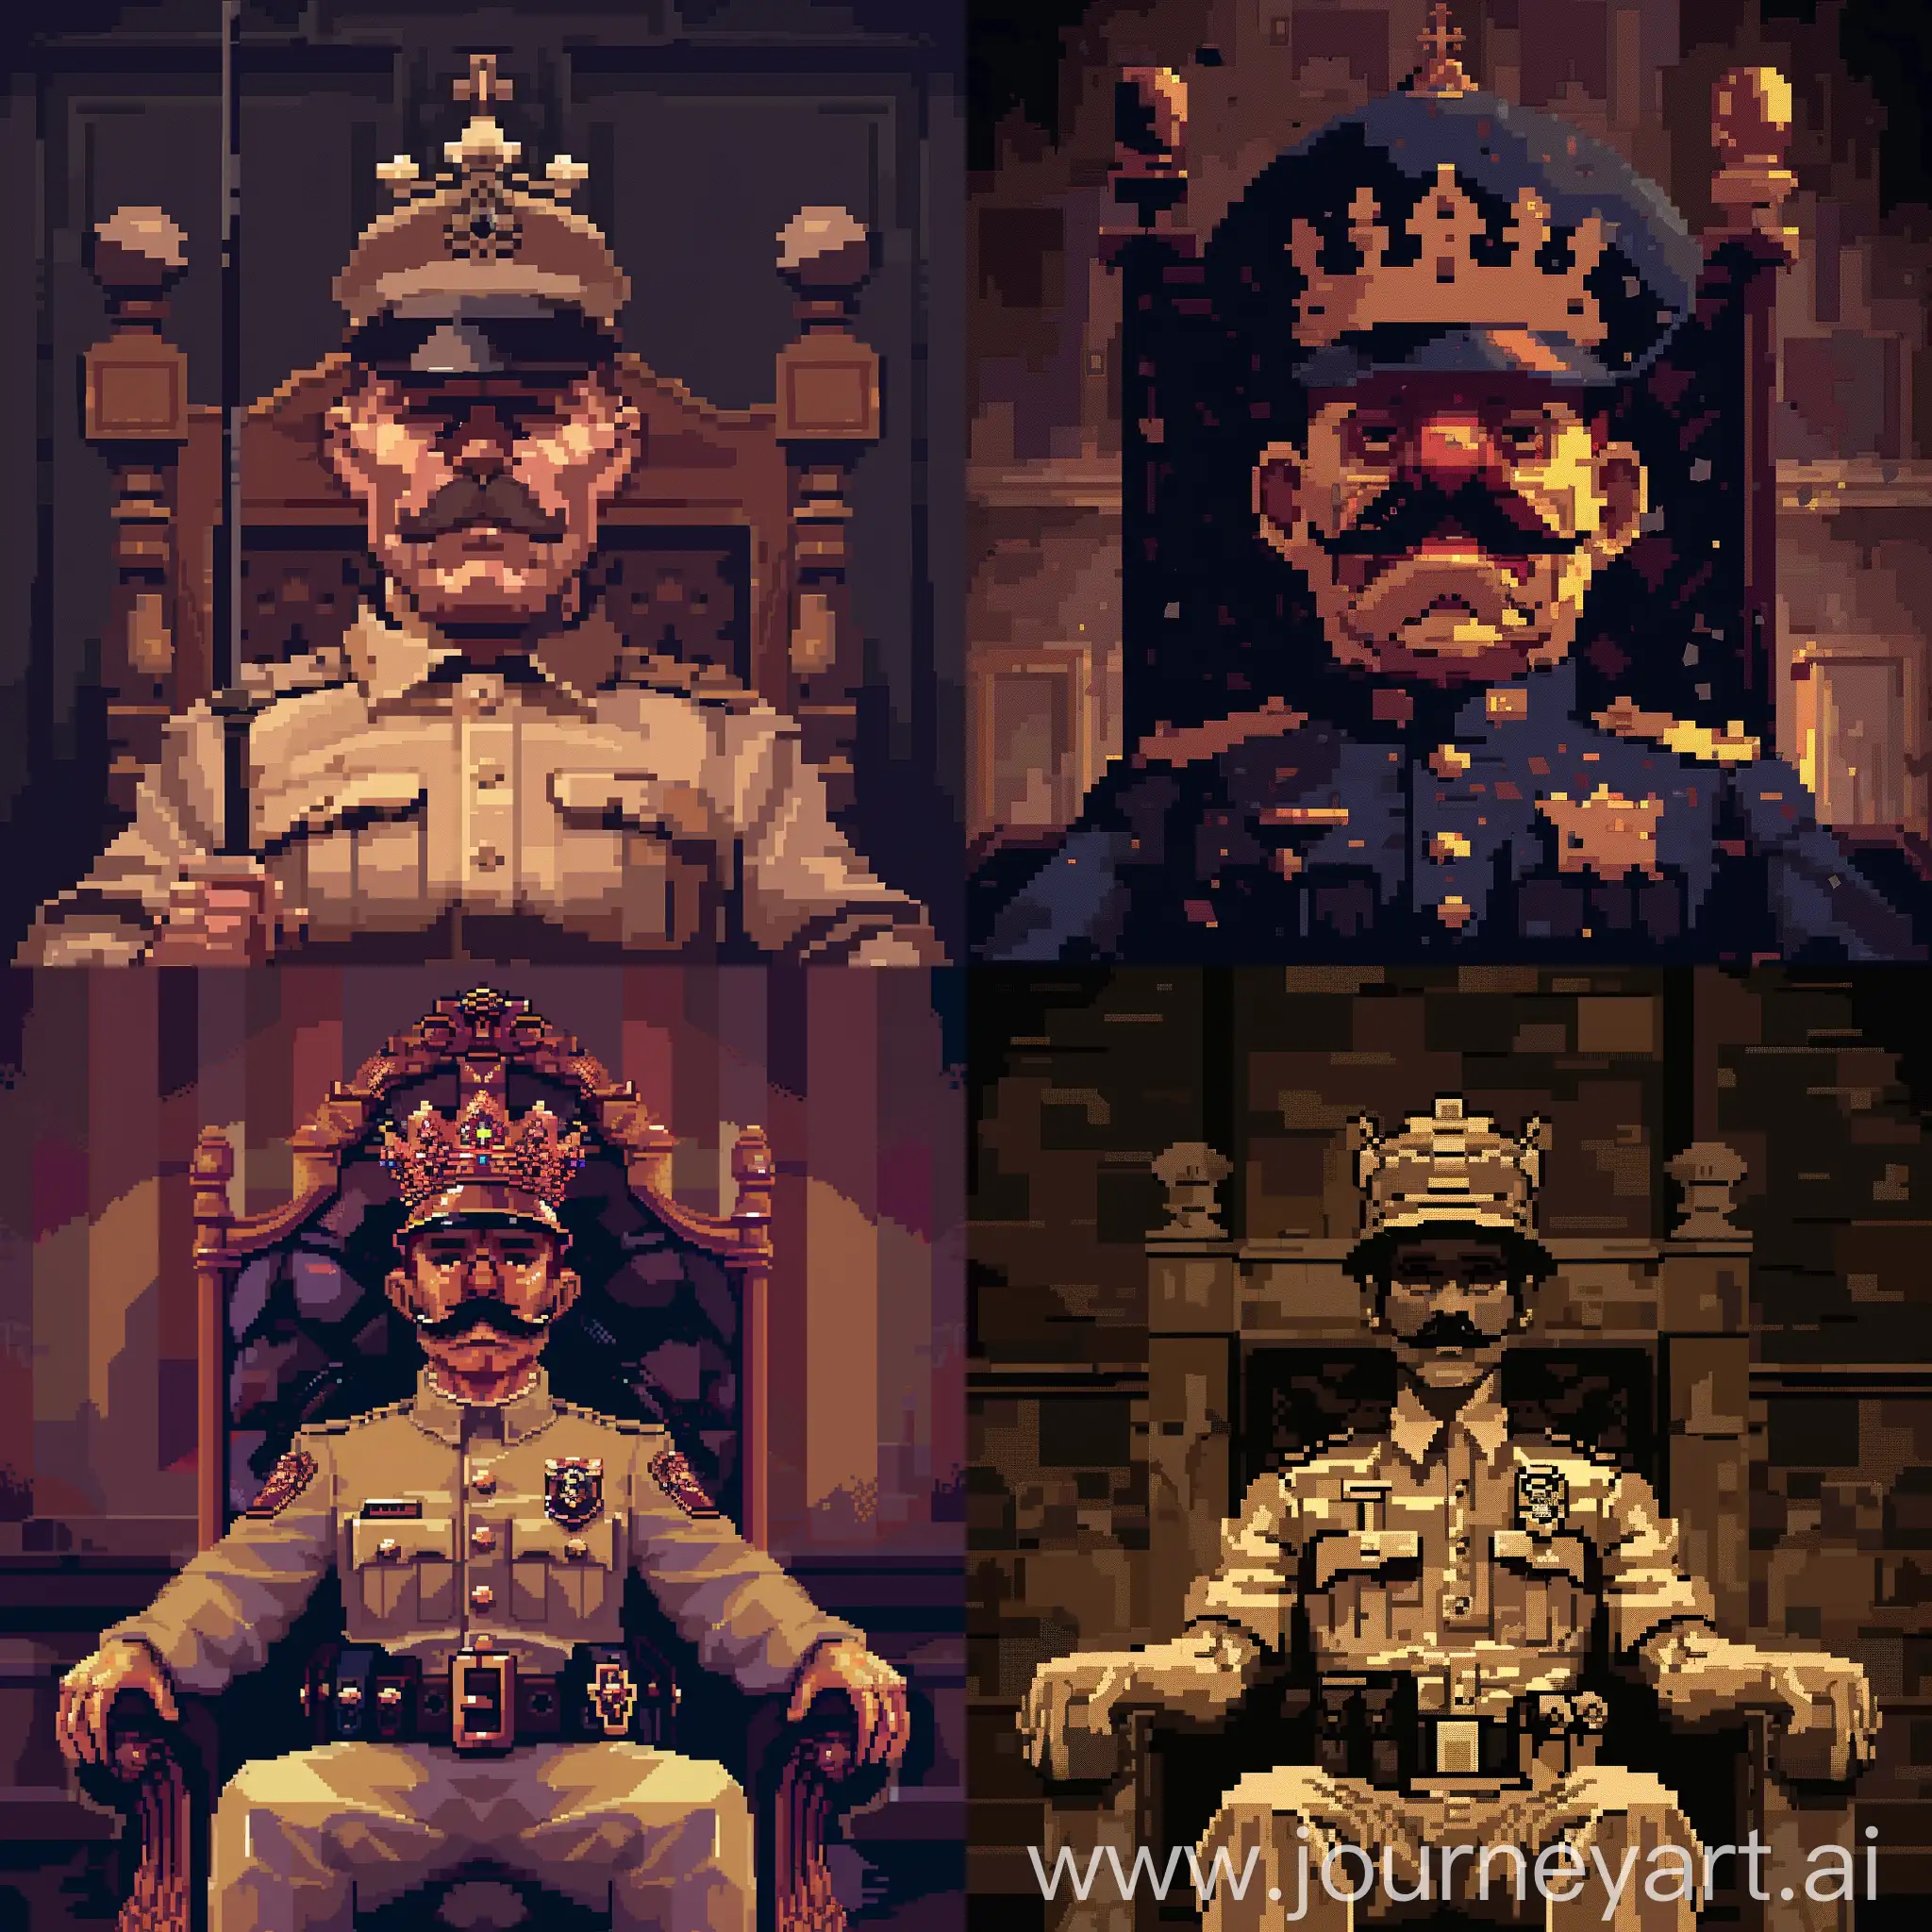 Pixel-Art-of-Policemans-Coronation-Dark-Tones-Cold-Colors-and-Royal-Procession